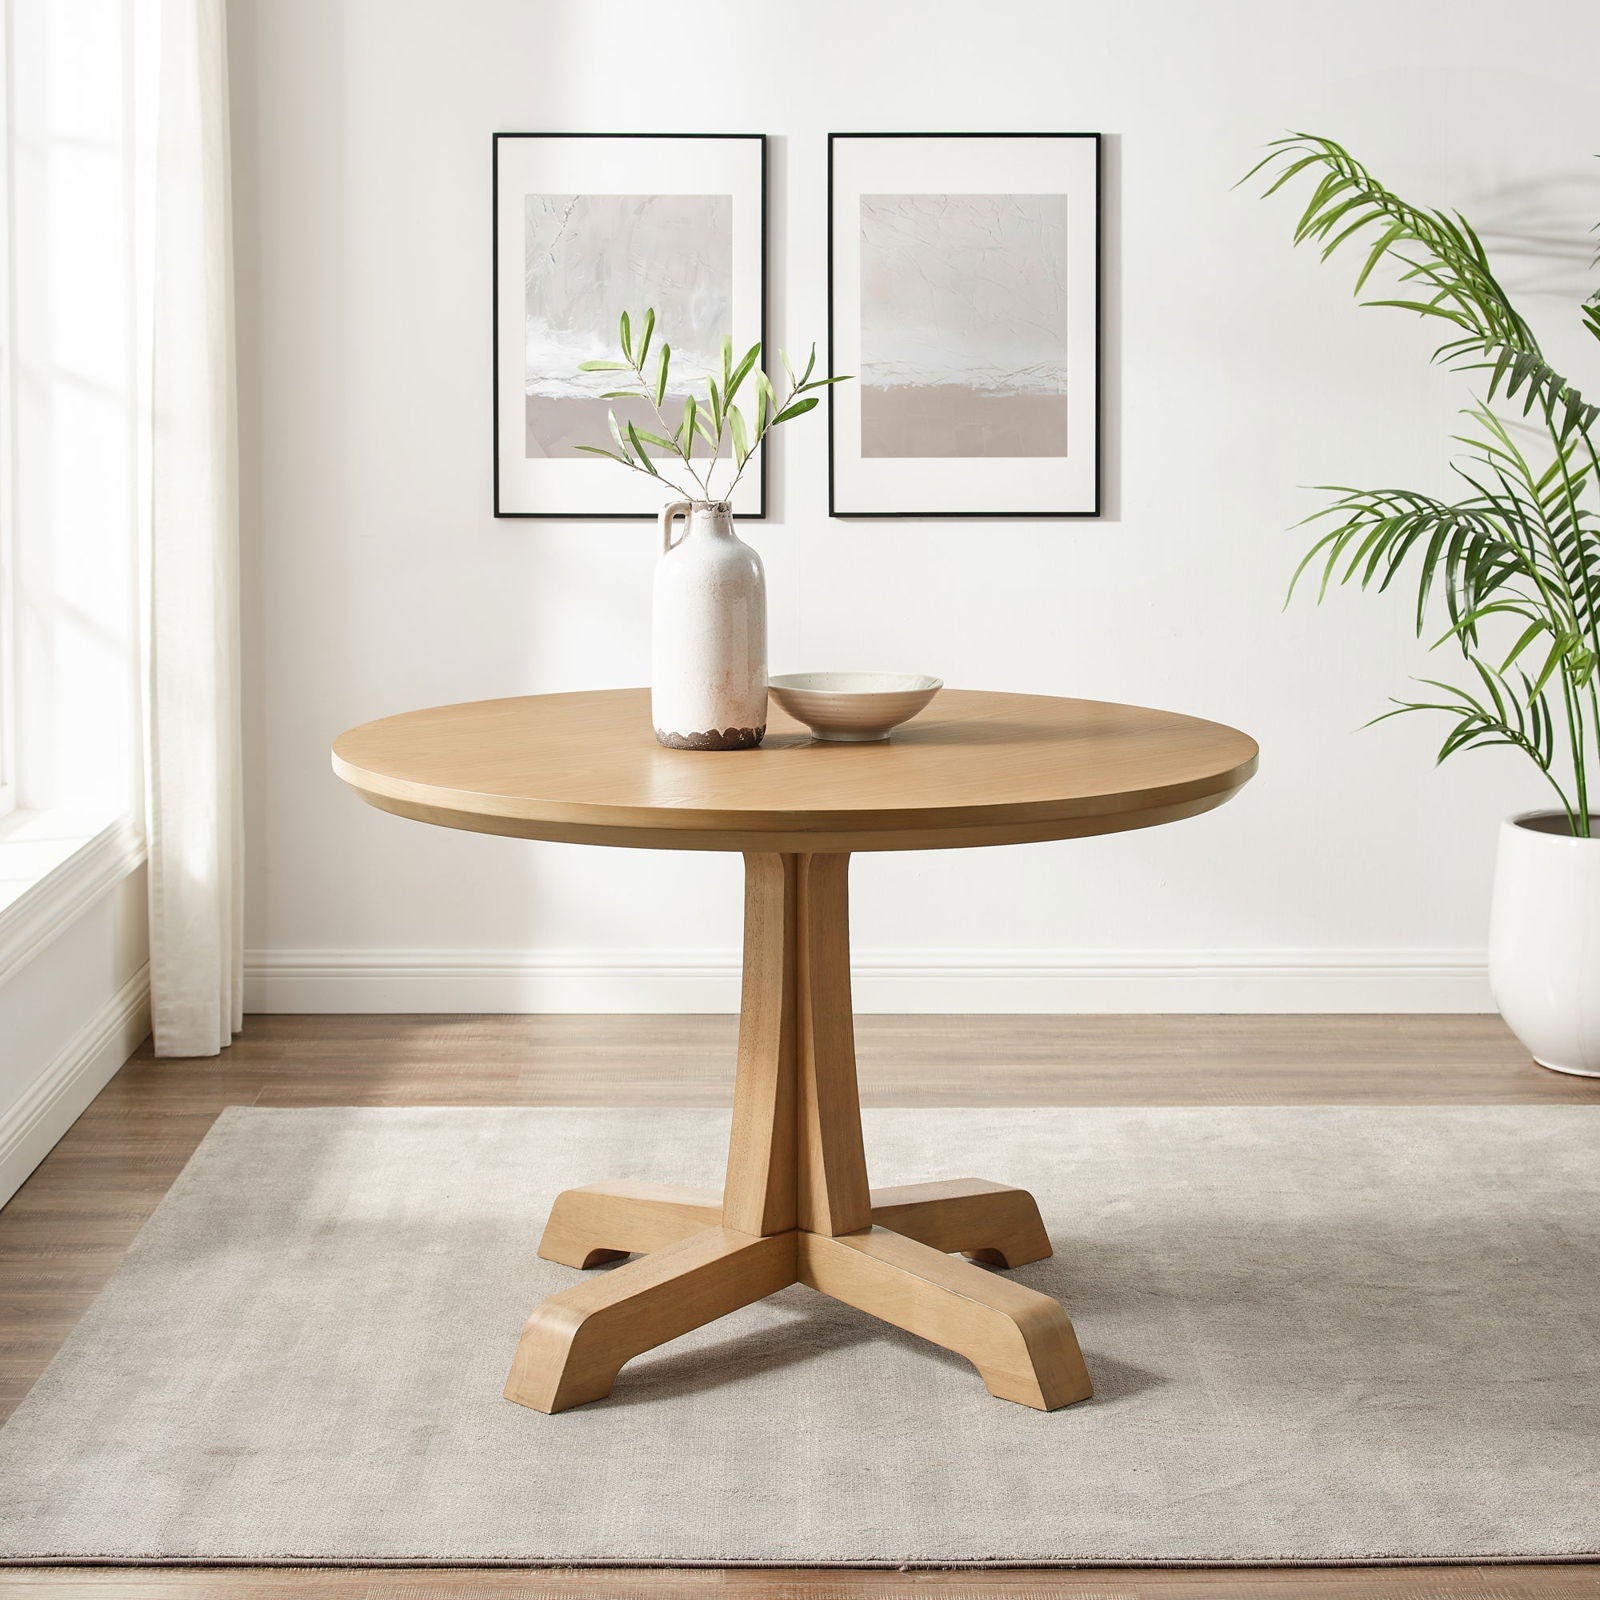 48" Round Dining Table with Pedestal Base - Mac & Mabel